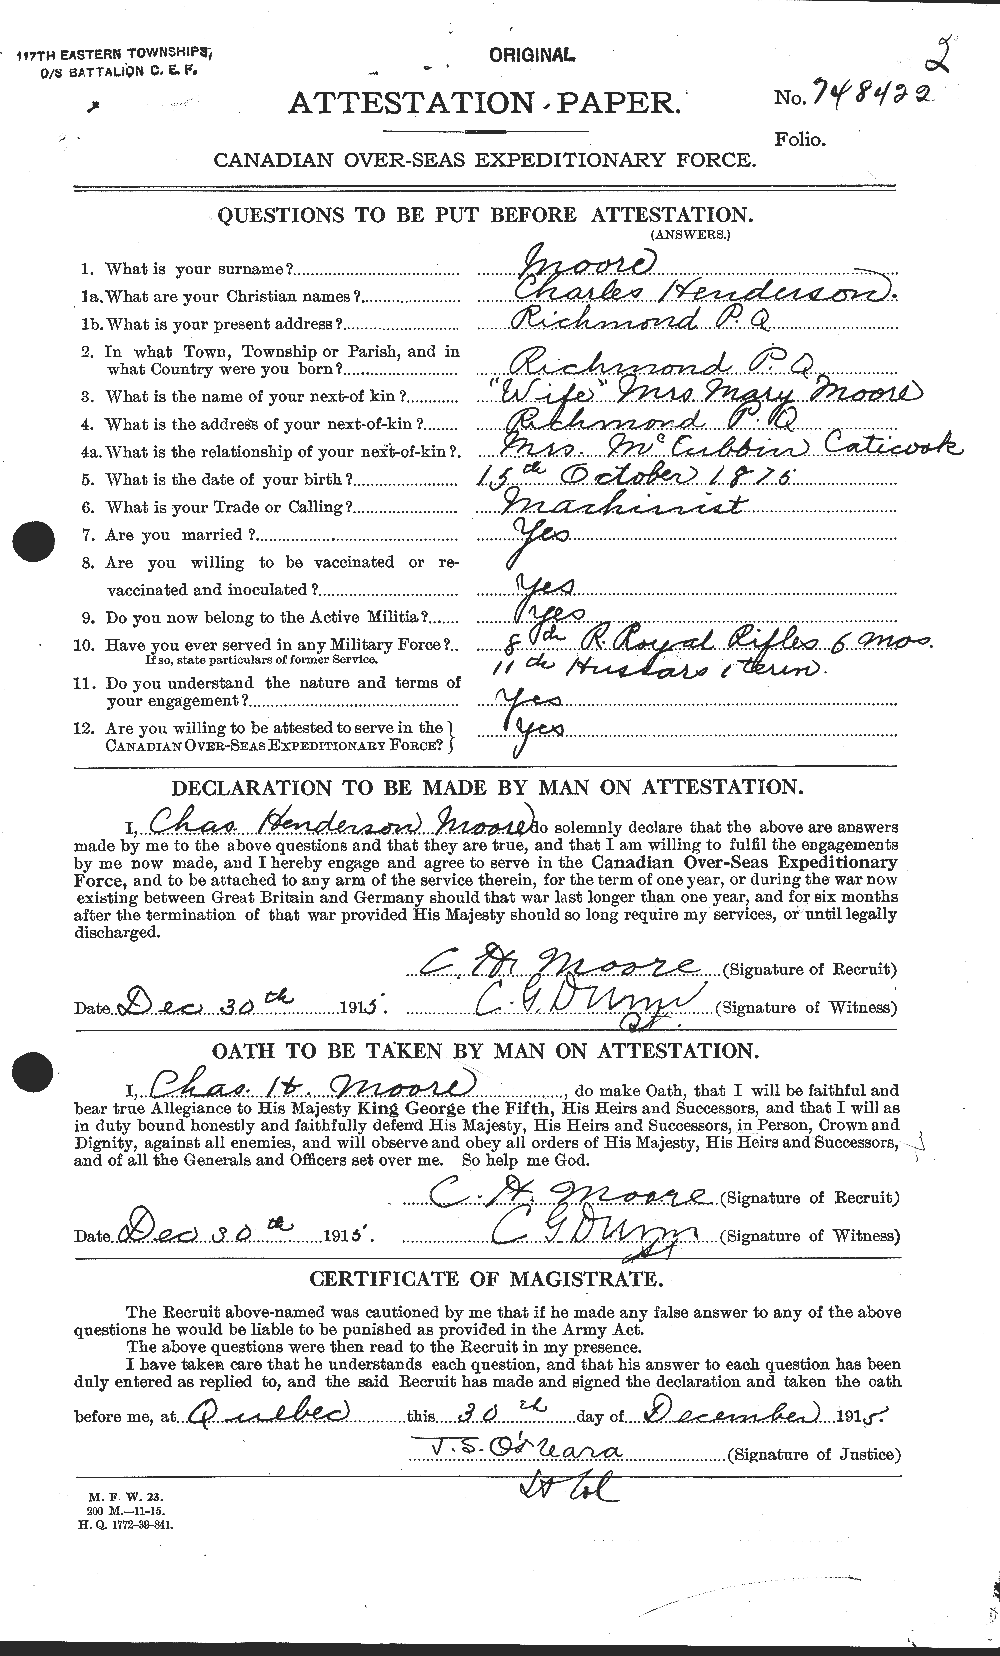 Personnel Records of the First World War - CEF 506508a